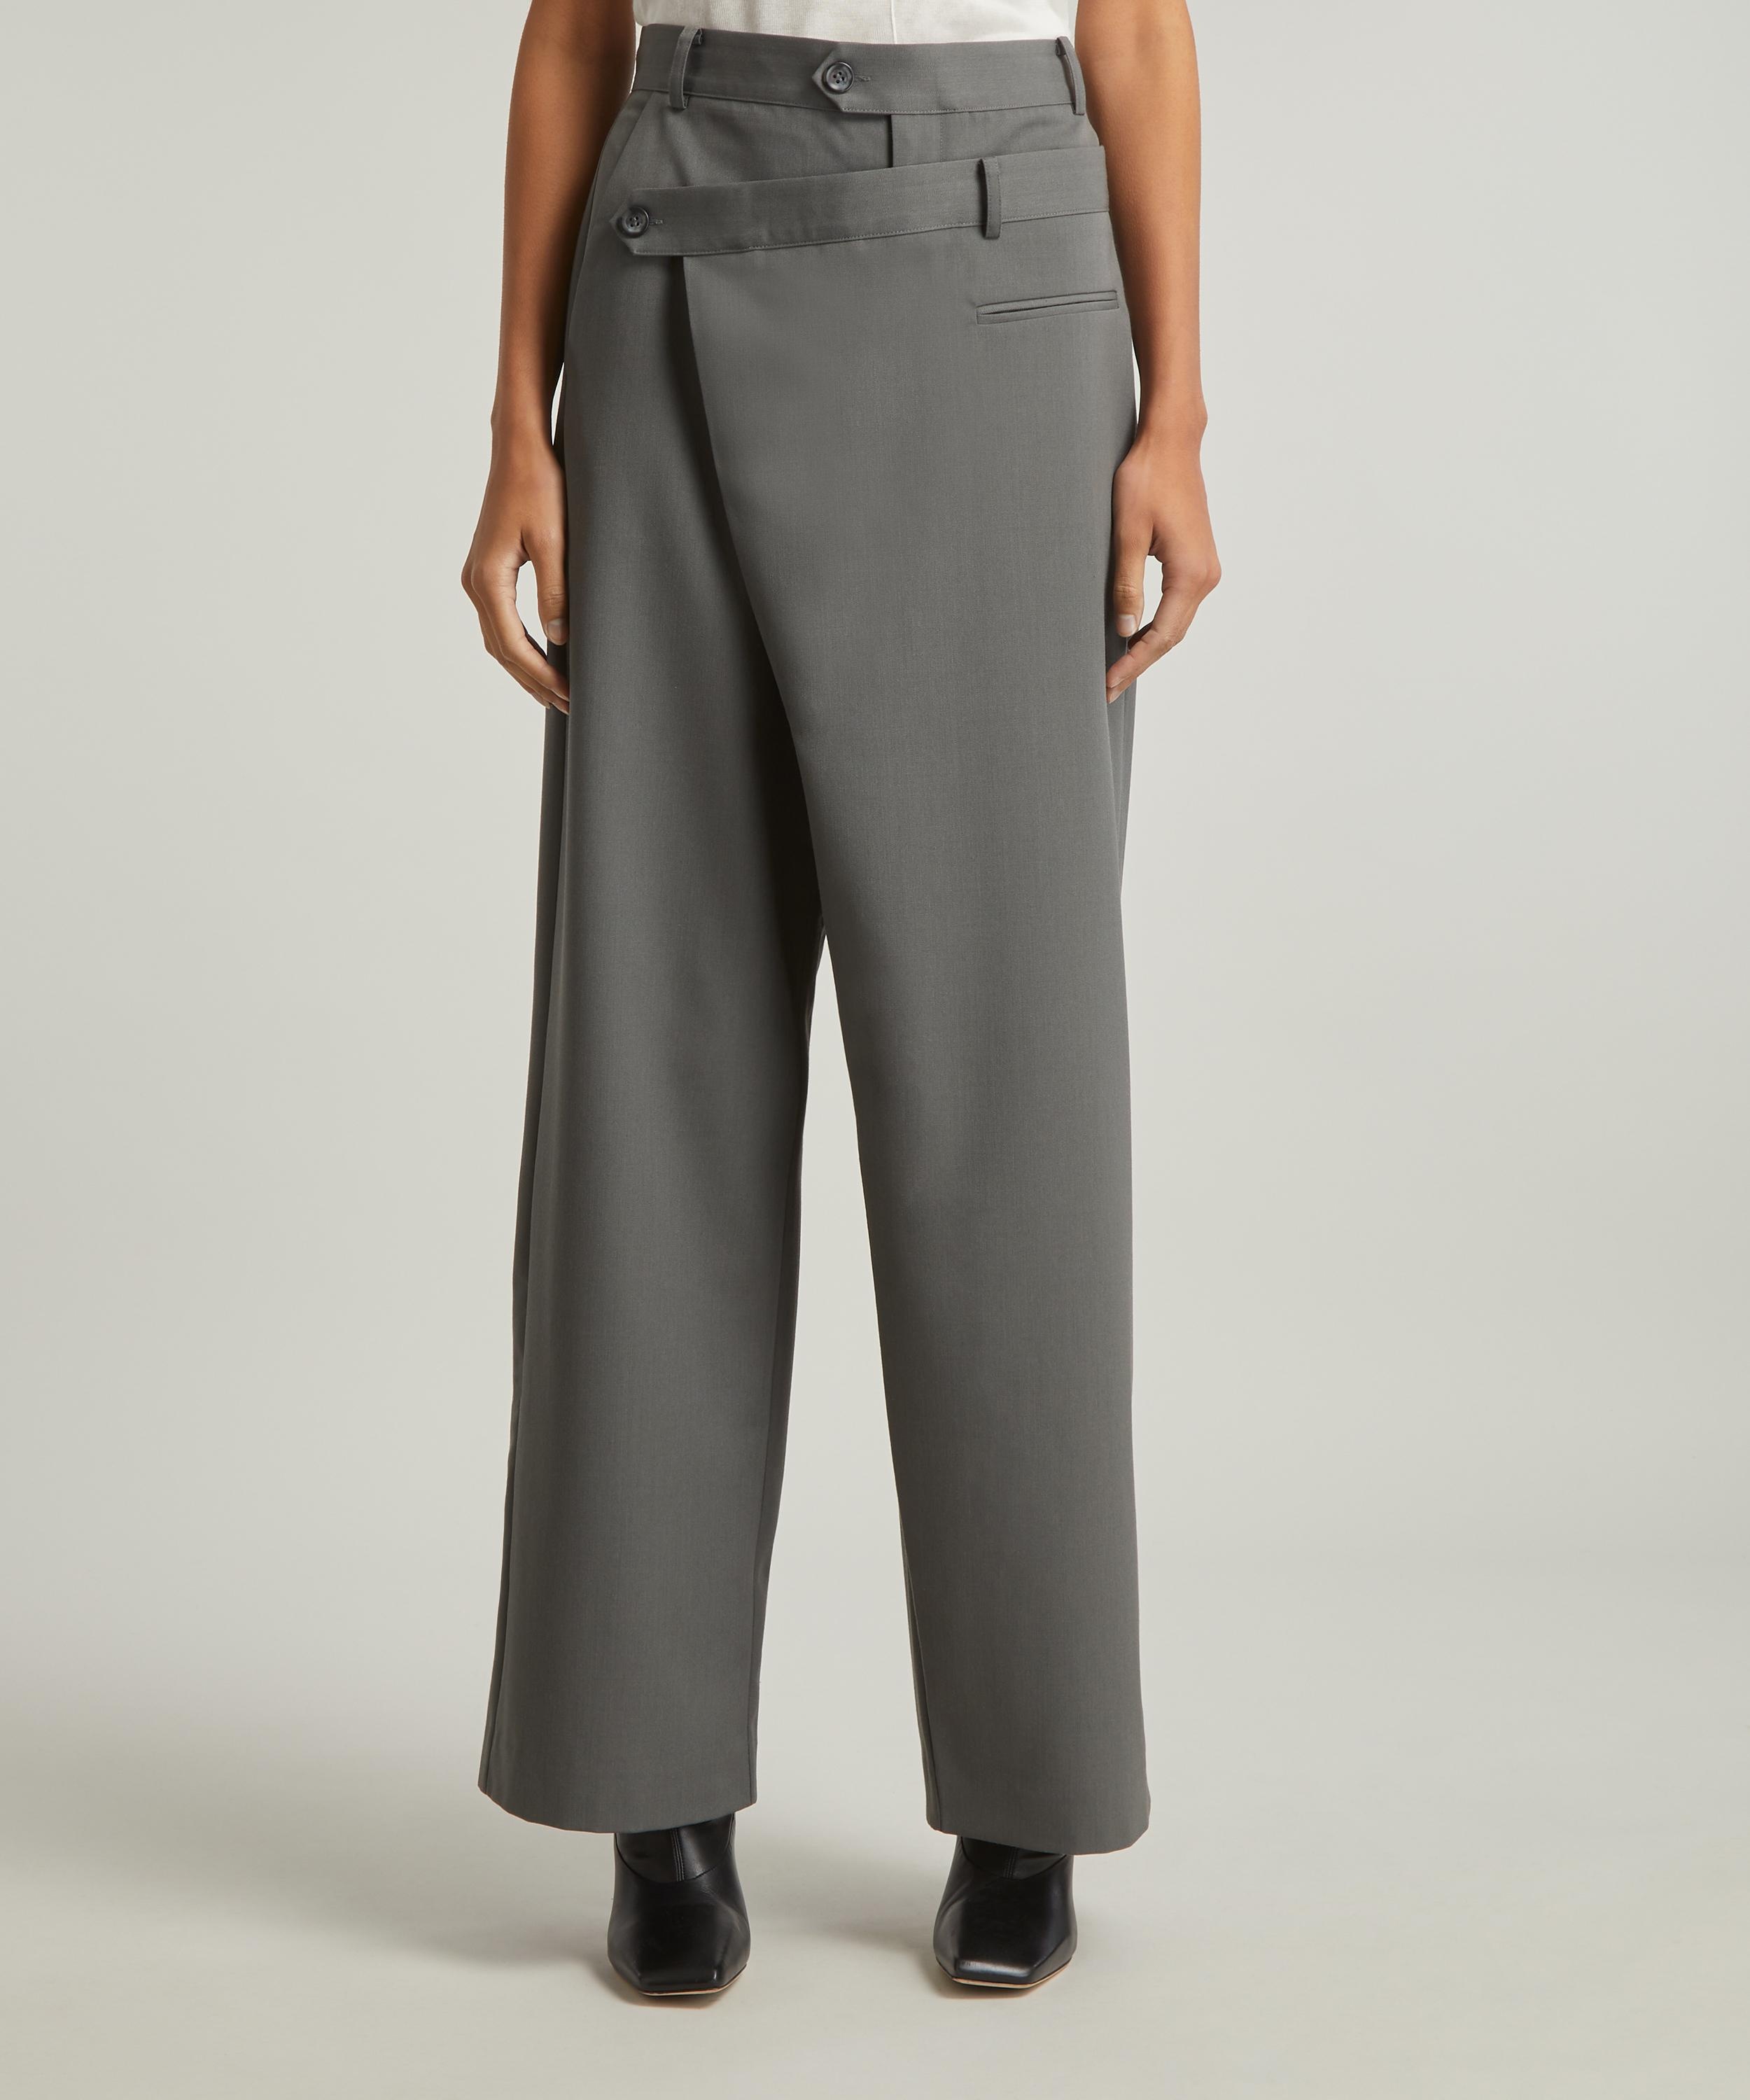 Deconstructed Waist Trousers - 3